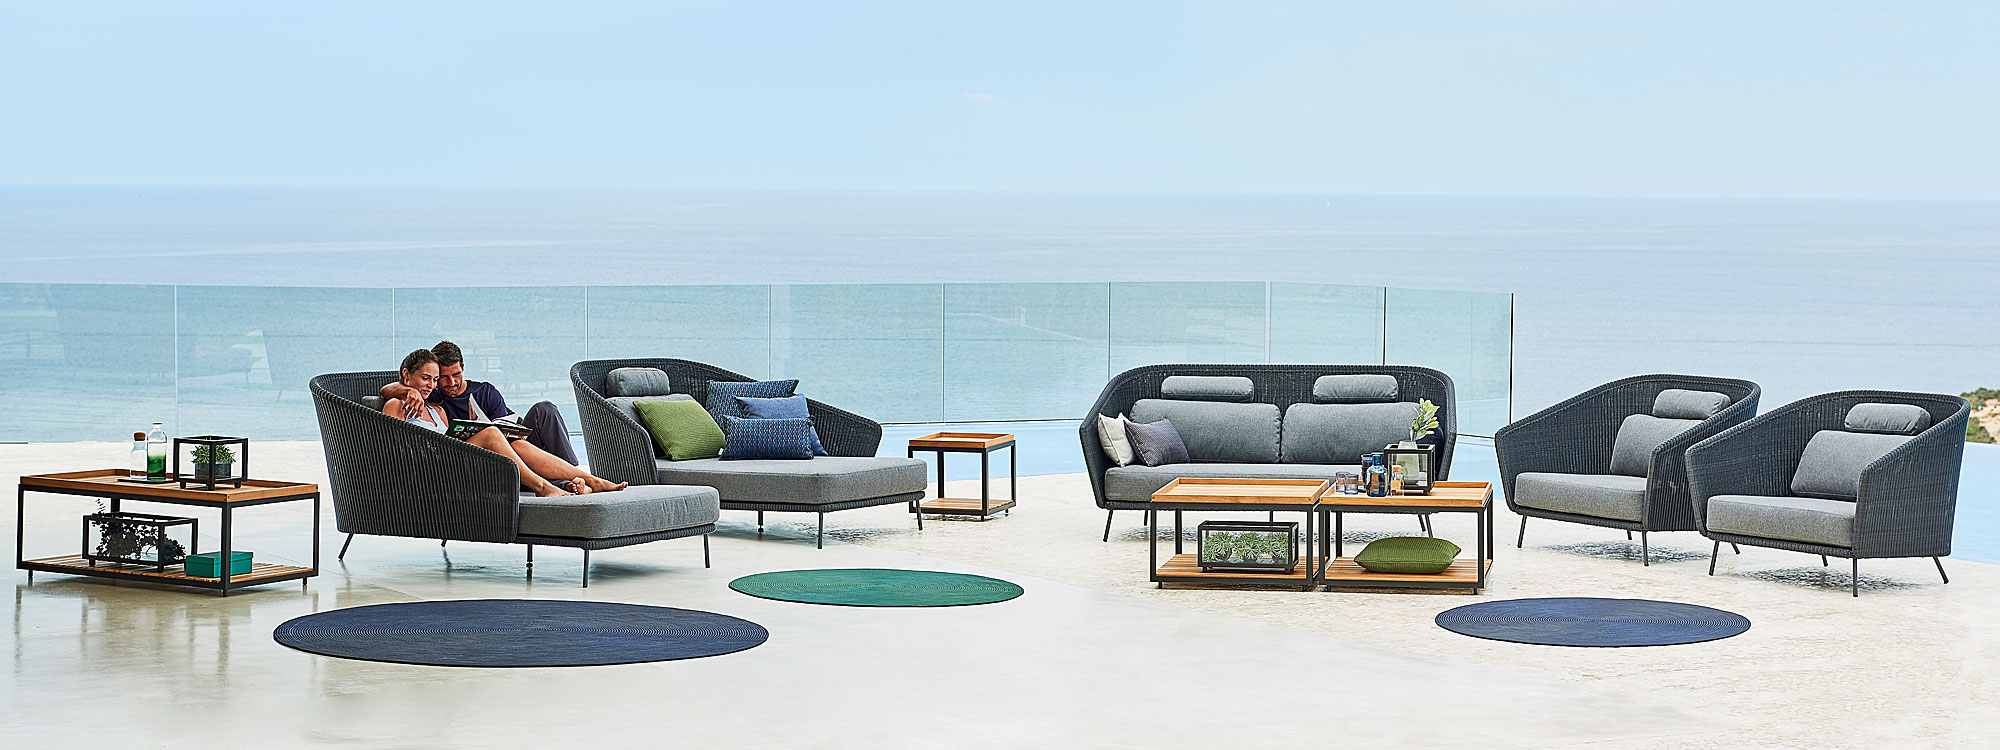 Image of couple relaxing in dark-grey Mega daybeds, next to Mega 2 seat garden sofa and lounge chairs by Cane-line